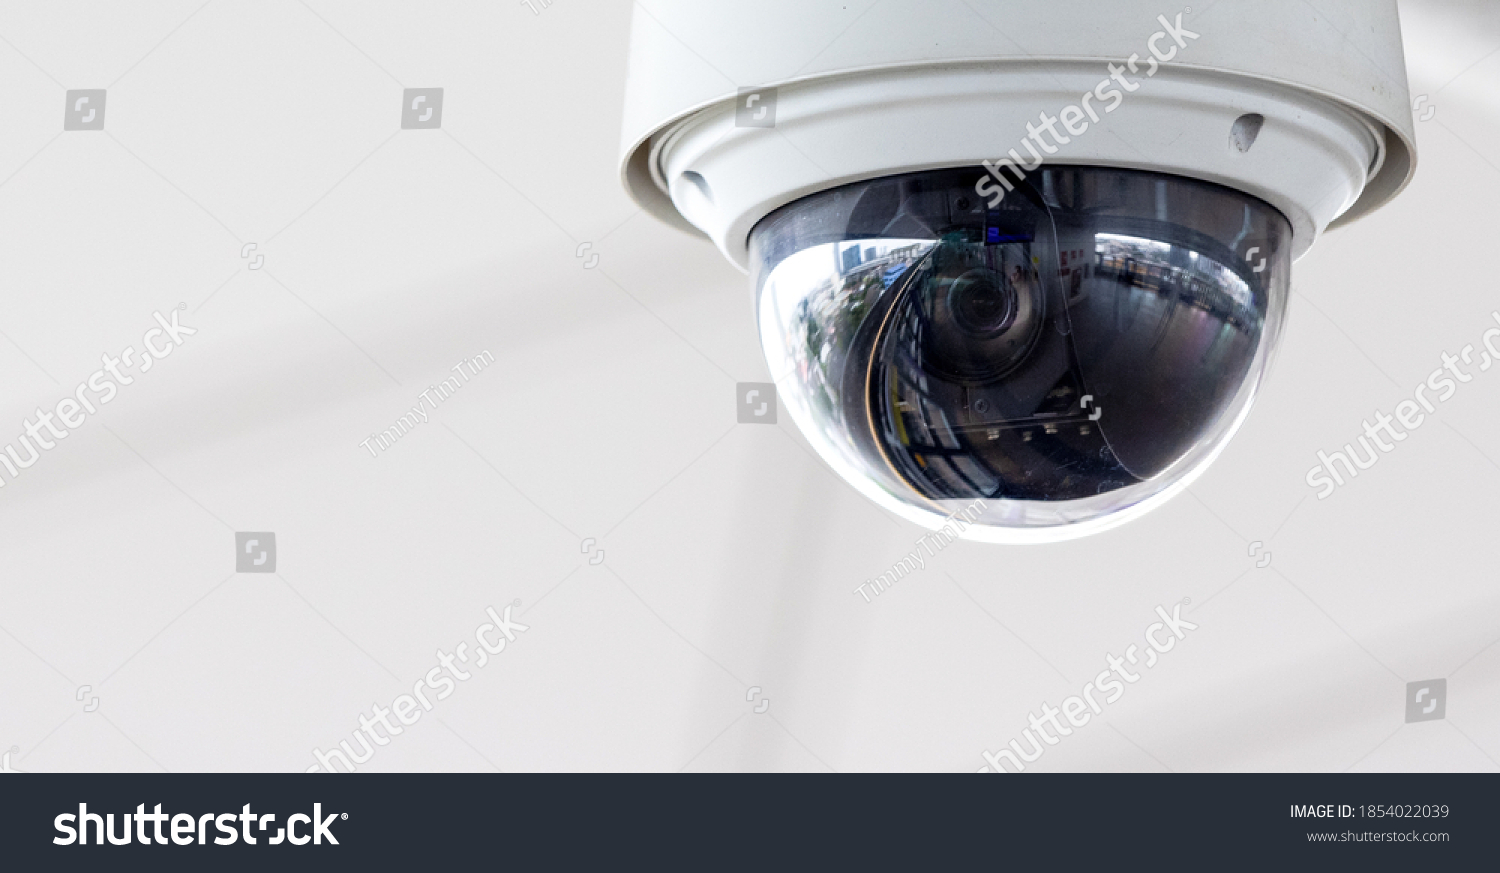 Closeup of white dome type cctv digital security camera installed on ceiling for observation. #1854022039